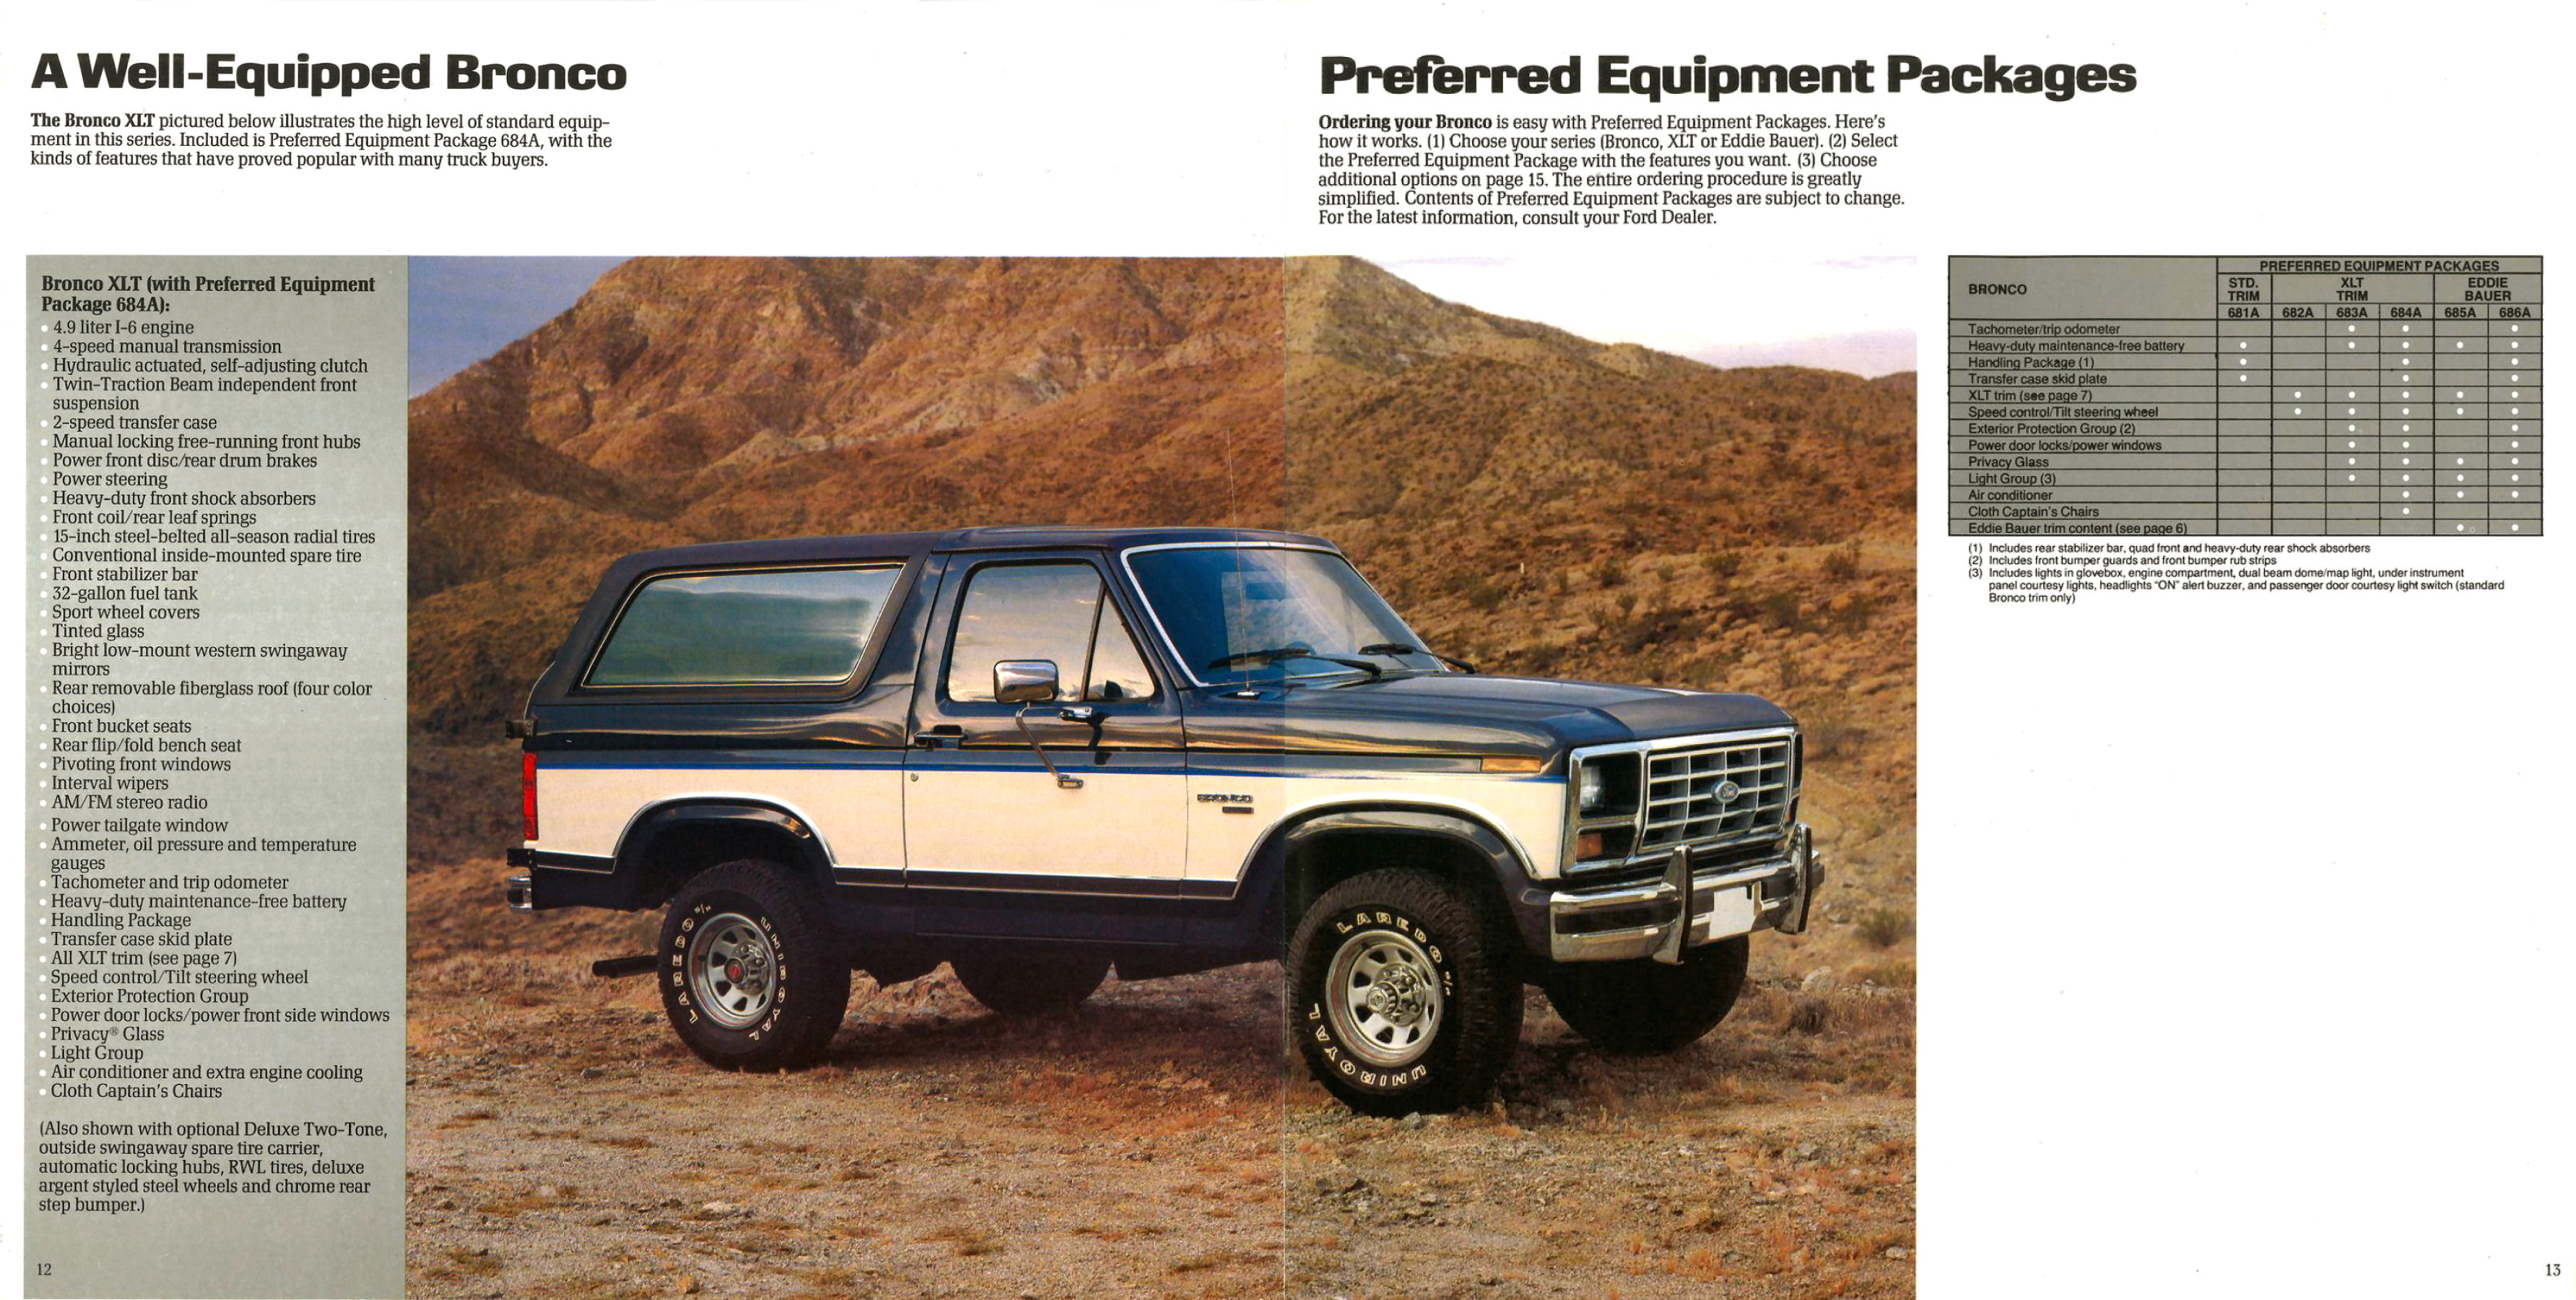 1986_Ford_Bronco-12-13